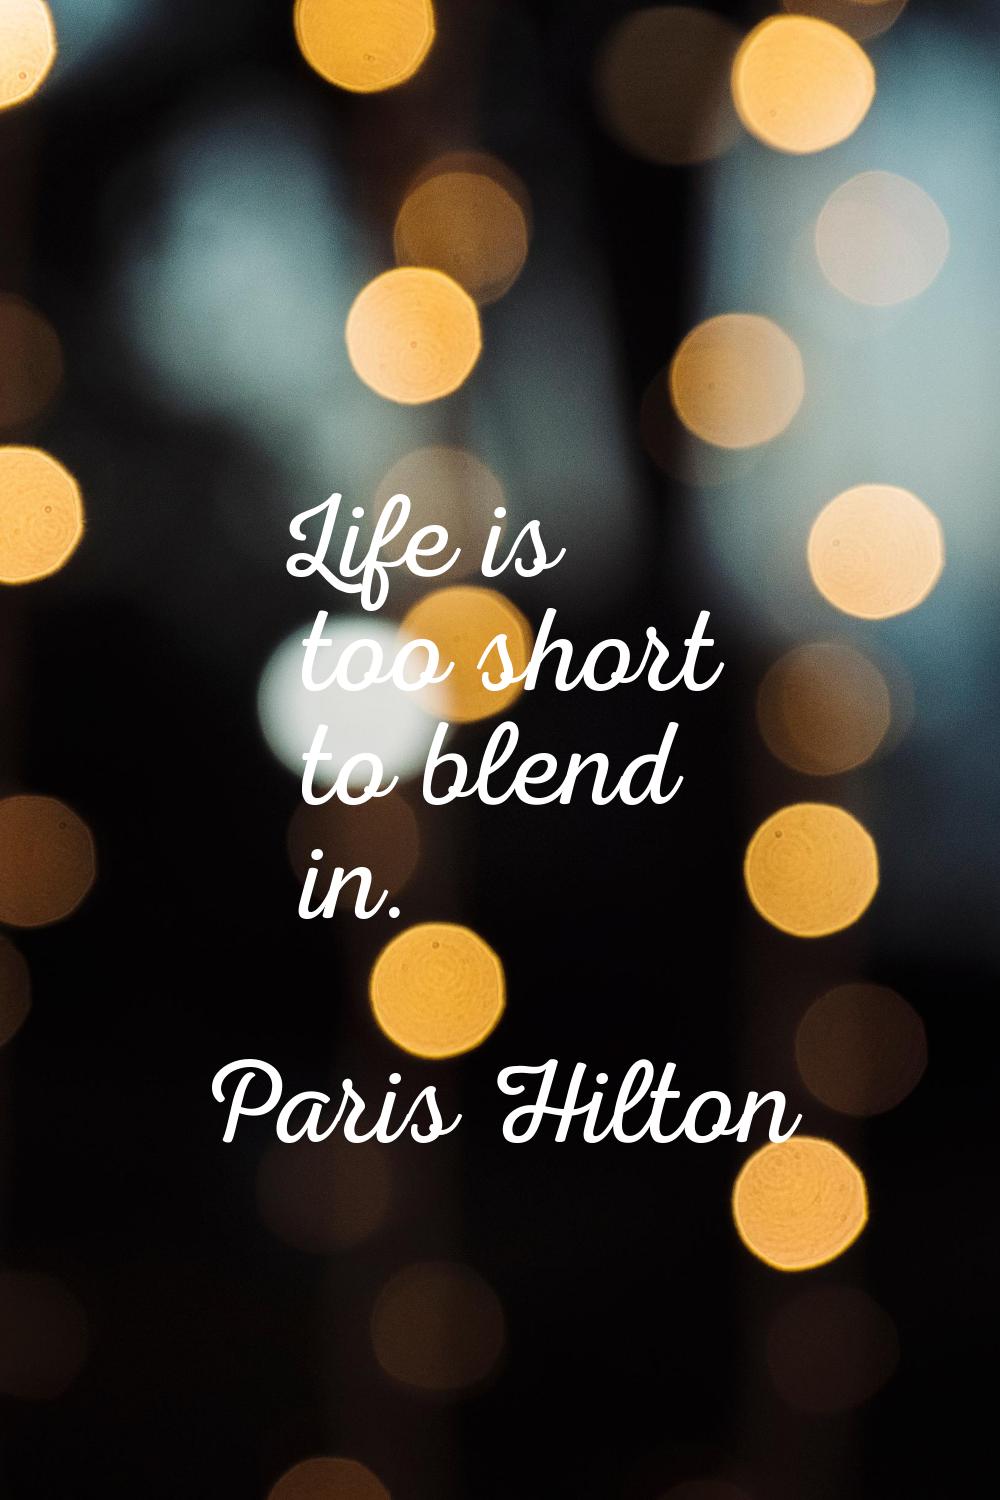 Life is too short to blend in.